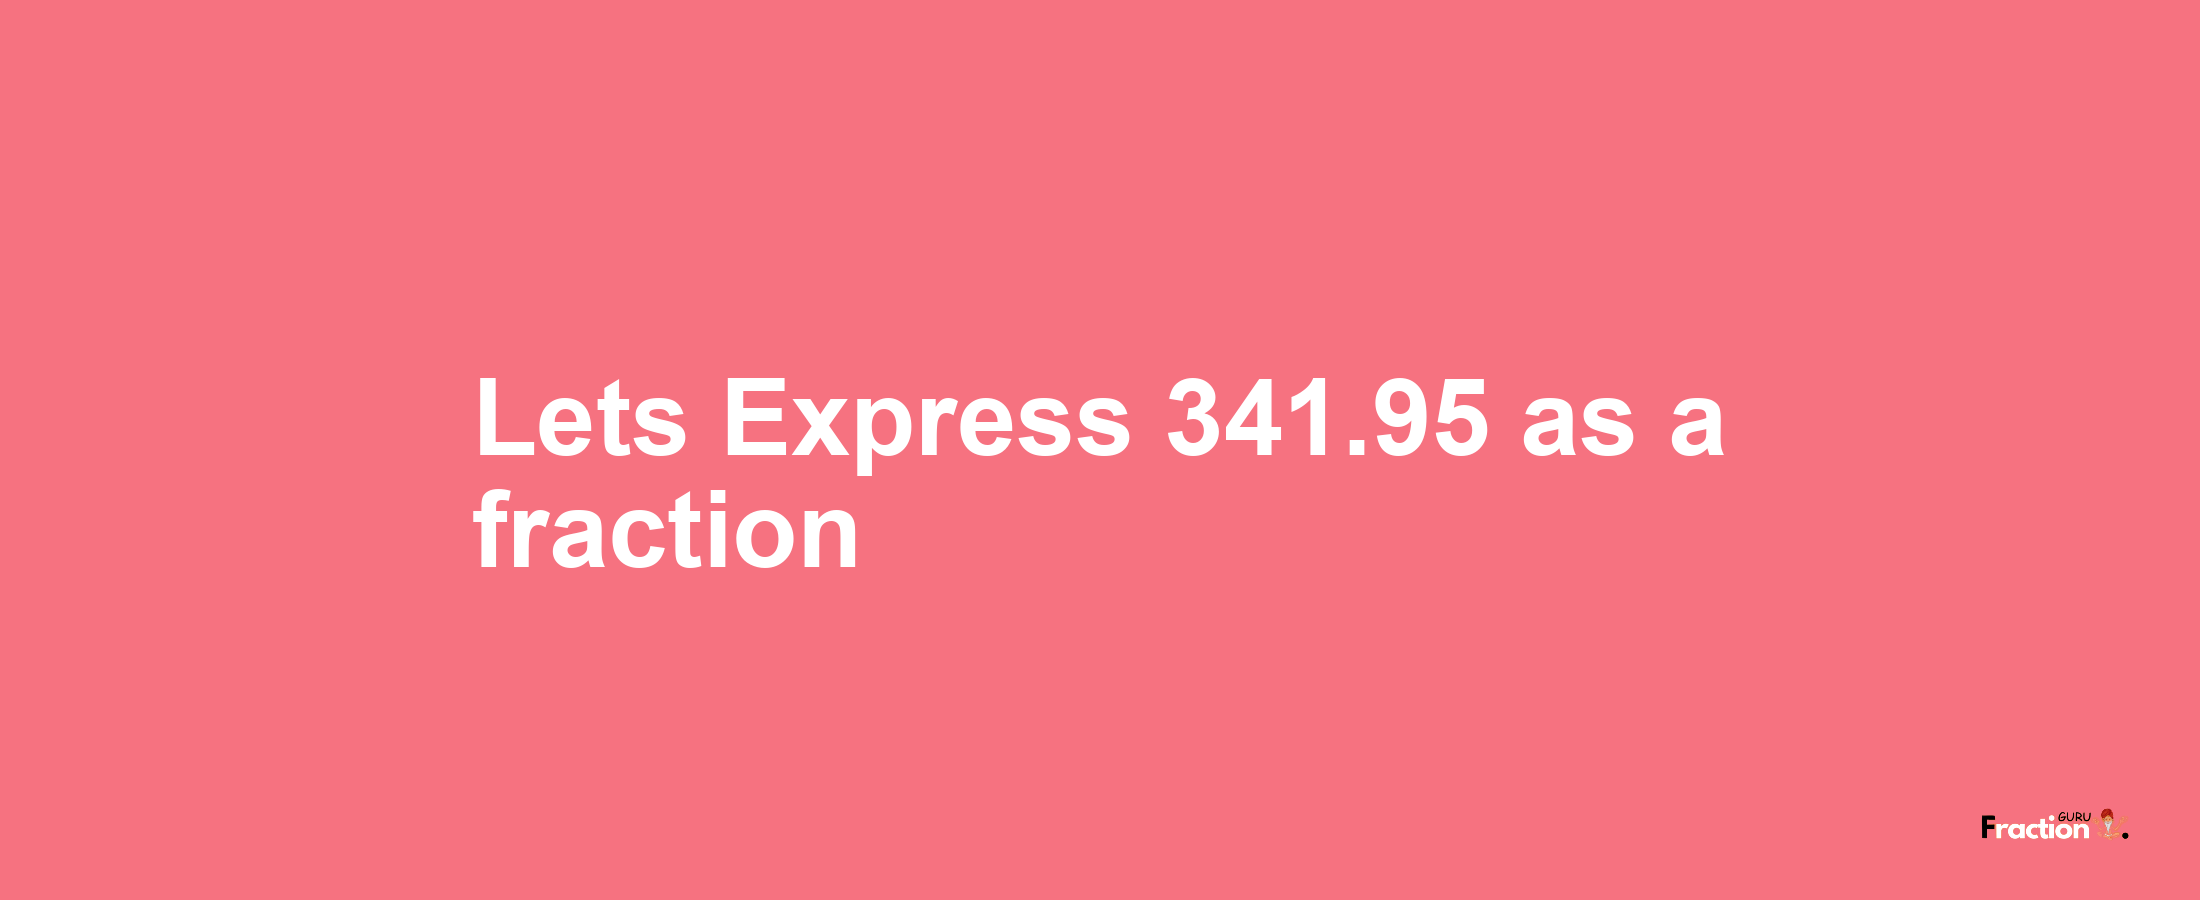 Lets Express 341.95 as afraction